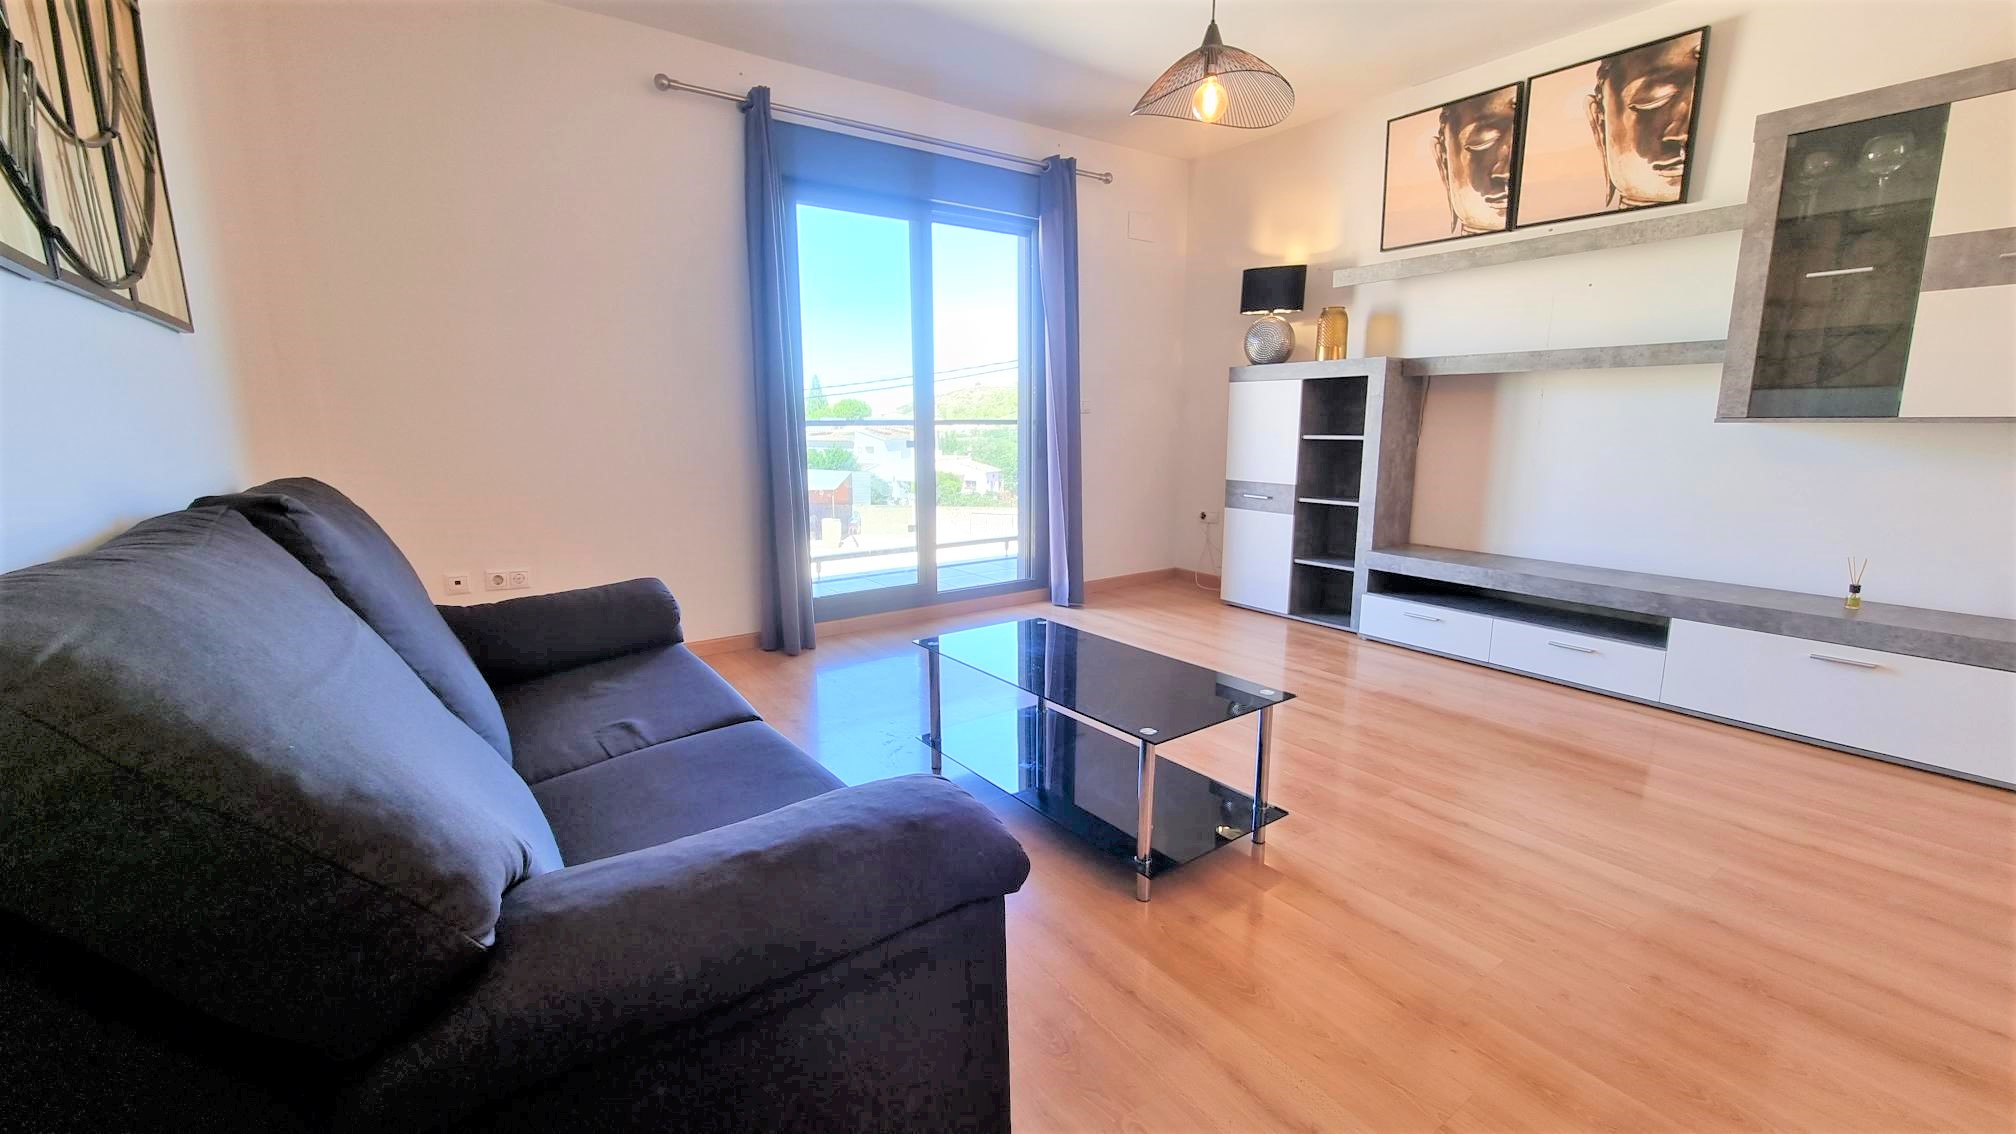 Apartment for sale in Pedreguer 3 bedrooms